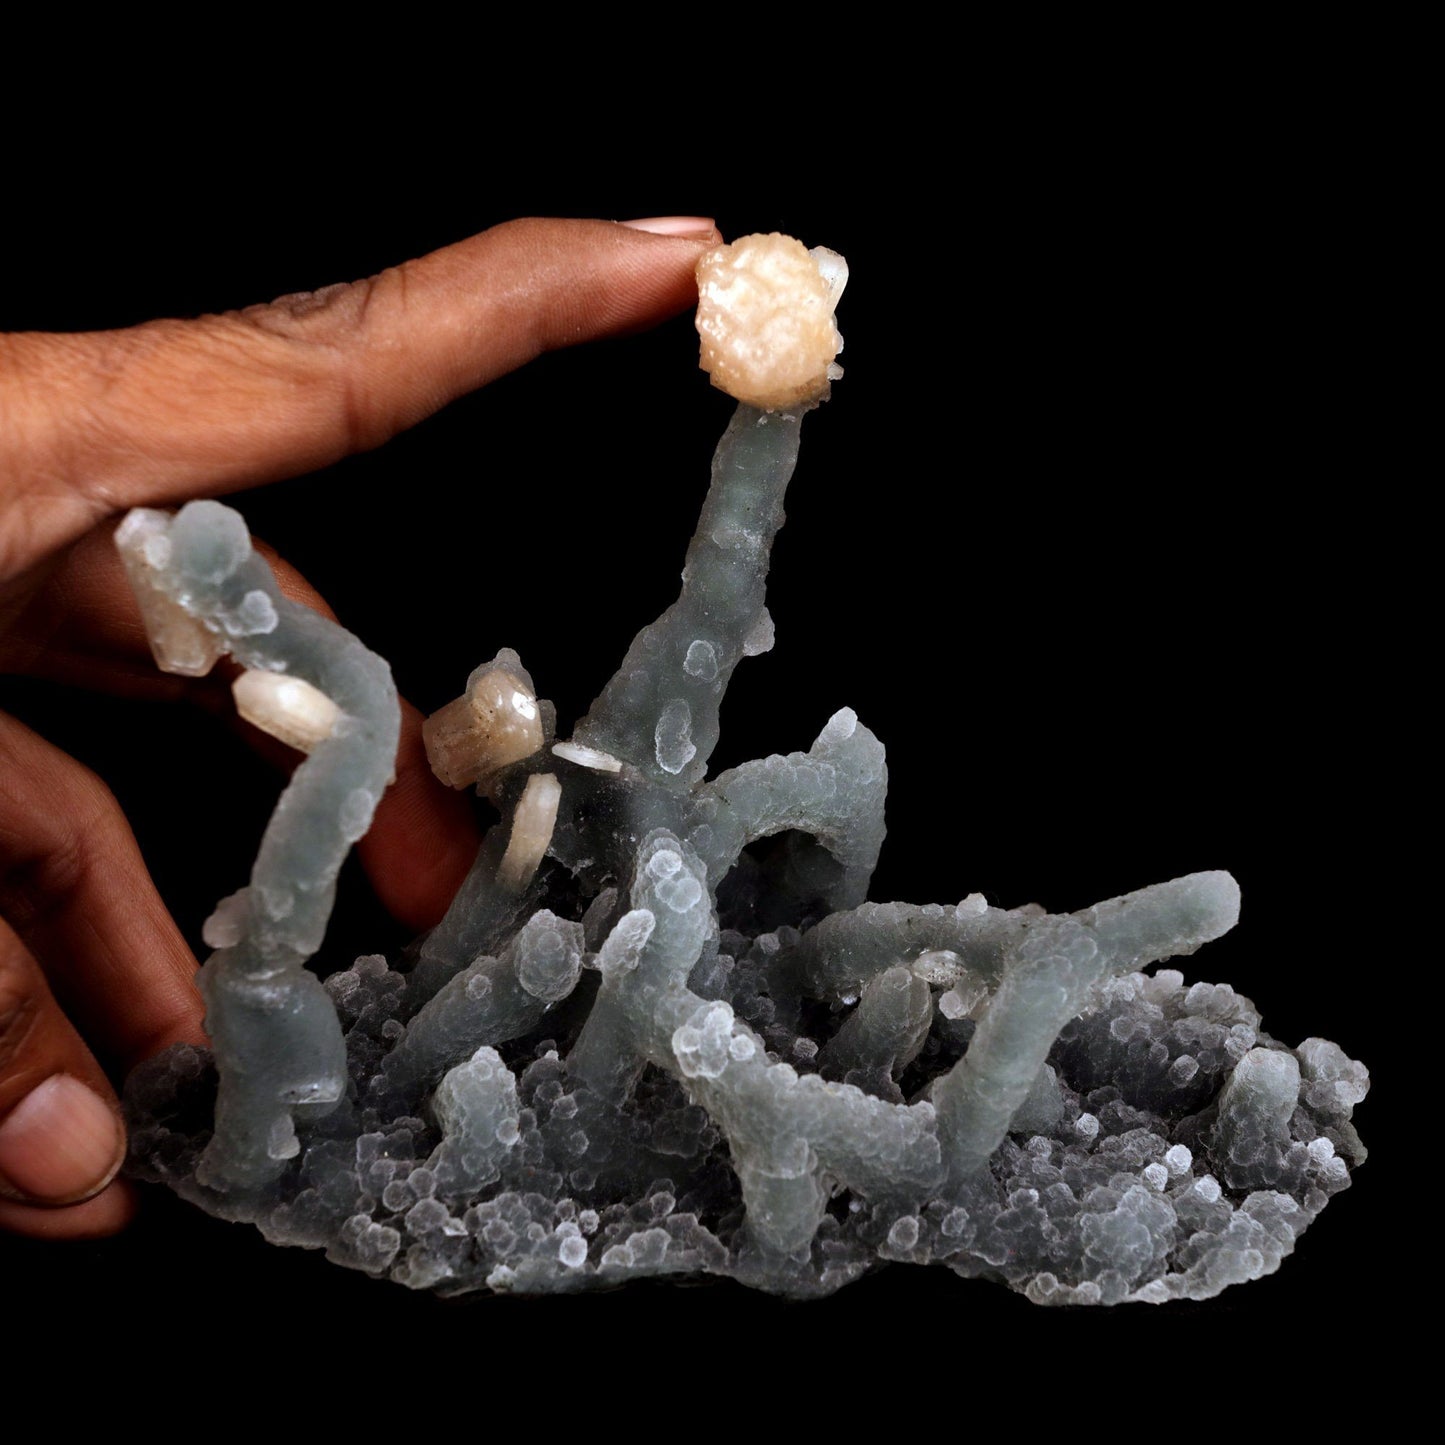 Pink Stilbite on Chalcedony Stalactite Natural Mineral Specimen # B 4…  https://www.superbminerals.us/products/pink-stilbite-on-chalcedony-stalactite-natural-mineral-specimen-b-4834  Features: Stalactites of drusy greenish-gray chalcedony dangle from a stunning corsage of iridescent, salmon-pink stilbite bowties. The matrix is highly sculptural.With only a few touched stalactite tips, this piece is essentially flawless and looks great from all angles!Outstanding huge Jalgaon combo material 